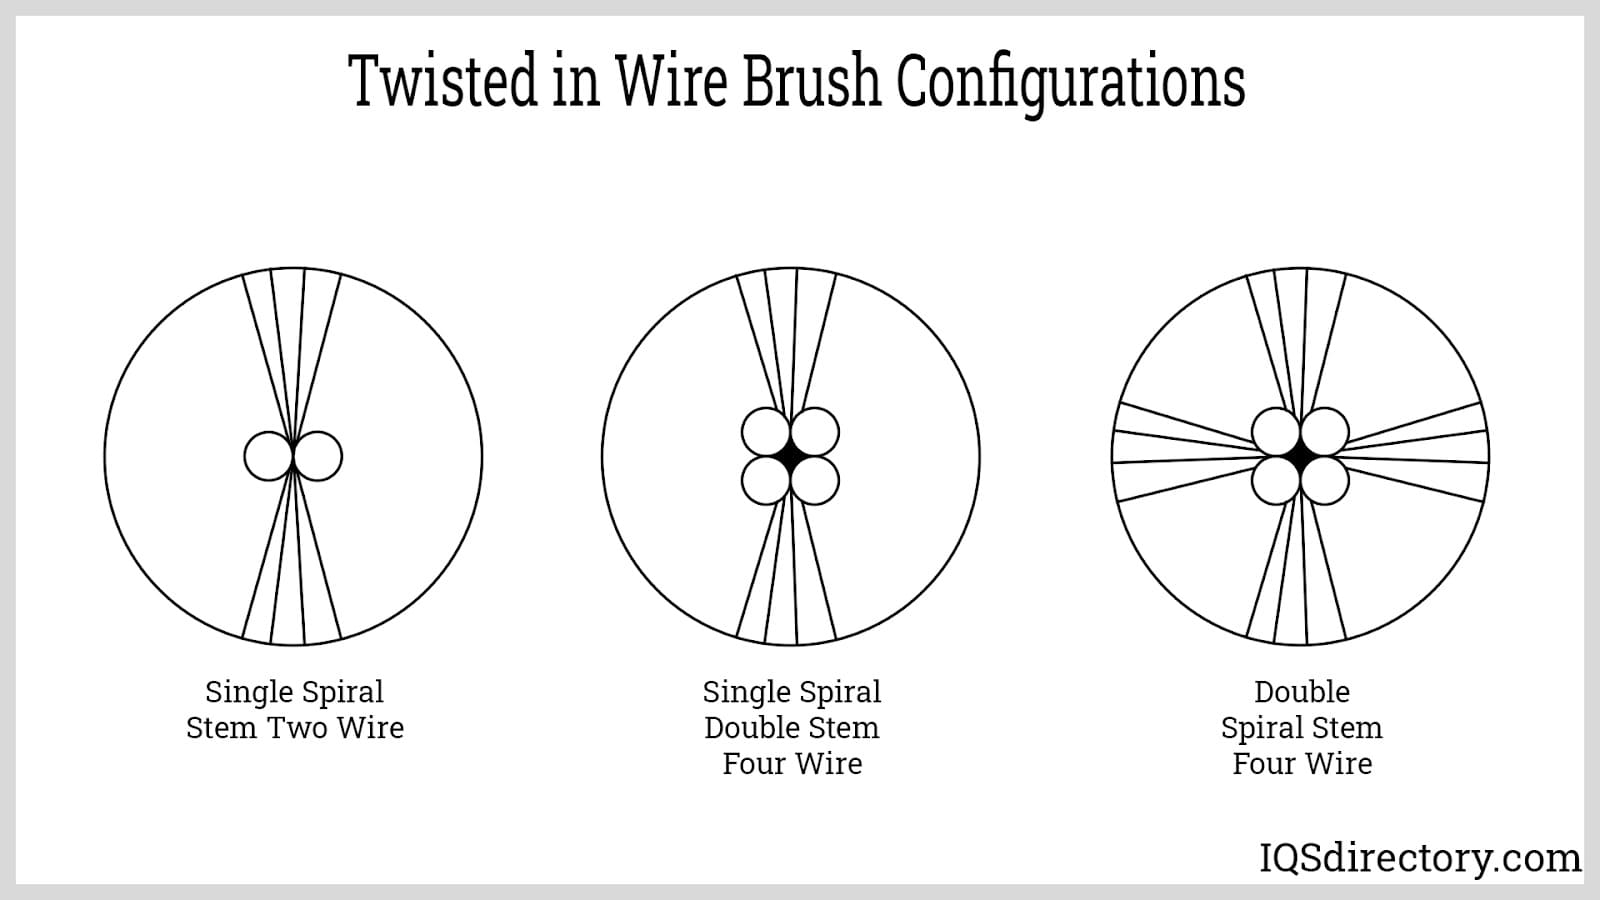 Twisted in Wire Brush Configurations